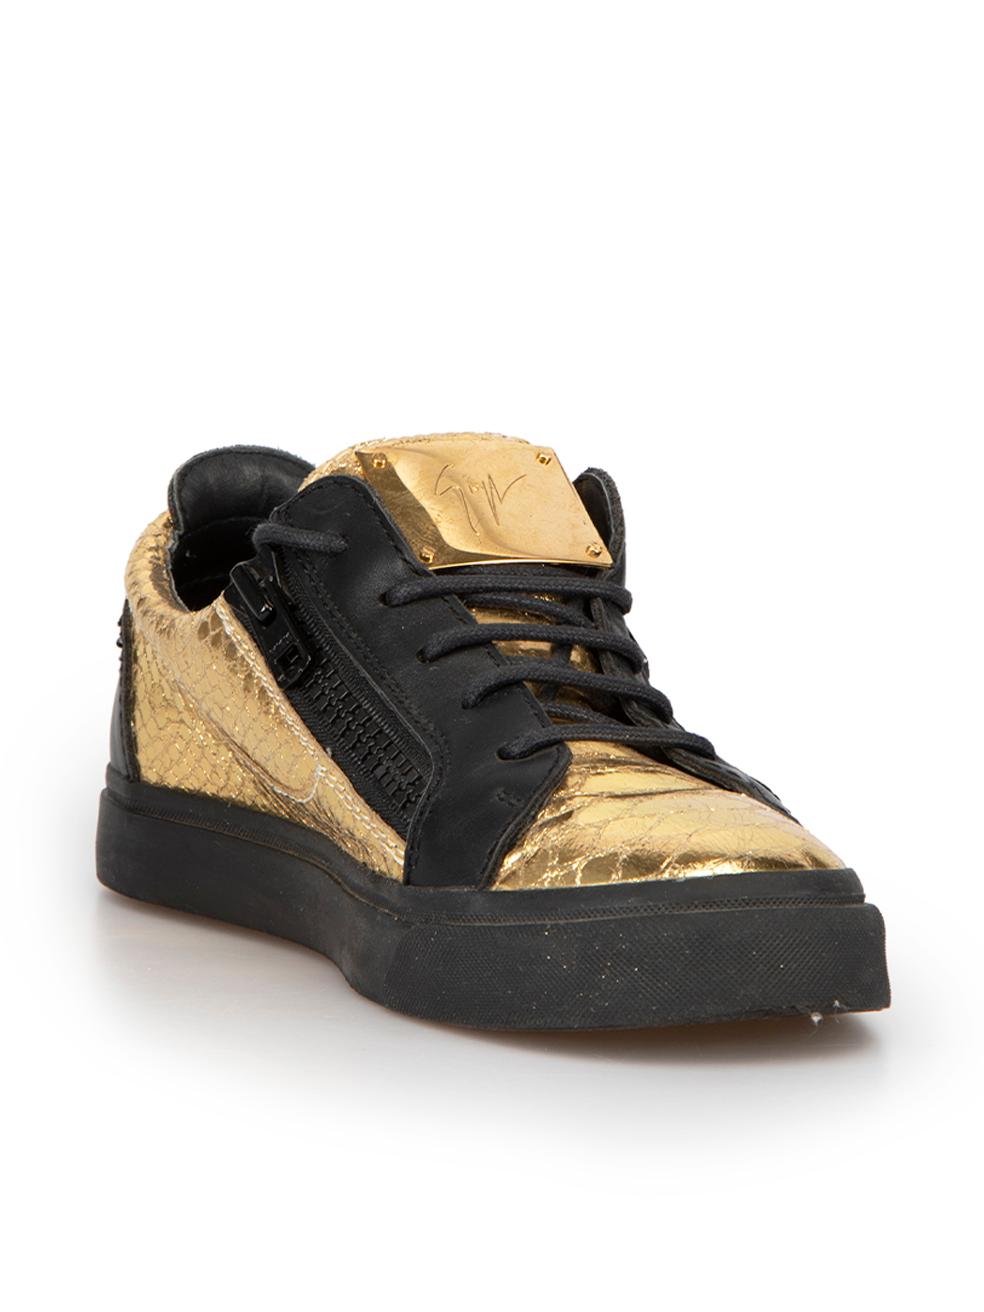 CONDITION is Very good. Hardly any visible wear to shoes is evident on this used Giuseppe Zanotti designer resale item. 
 
 Details
  Gold and black
 Leather
 Low top trainers
 Python skin embossed pattern
 Round toe
 Flatform heel
 Lace up closure
